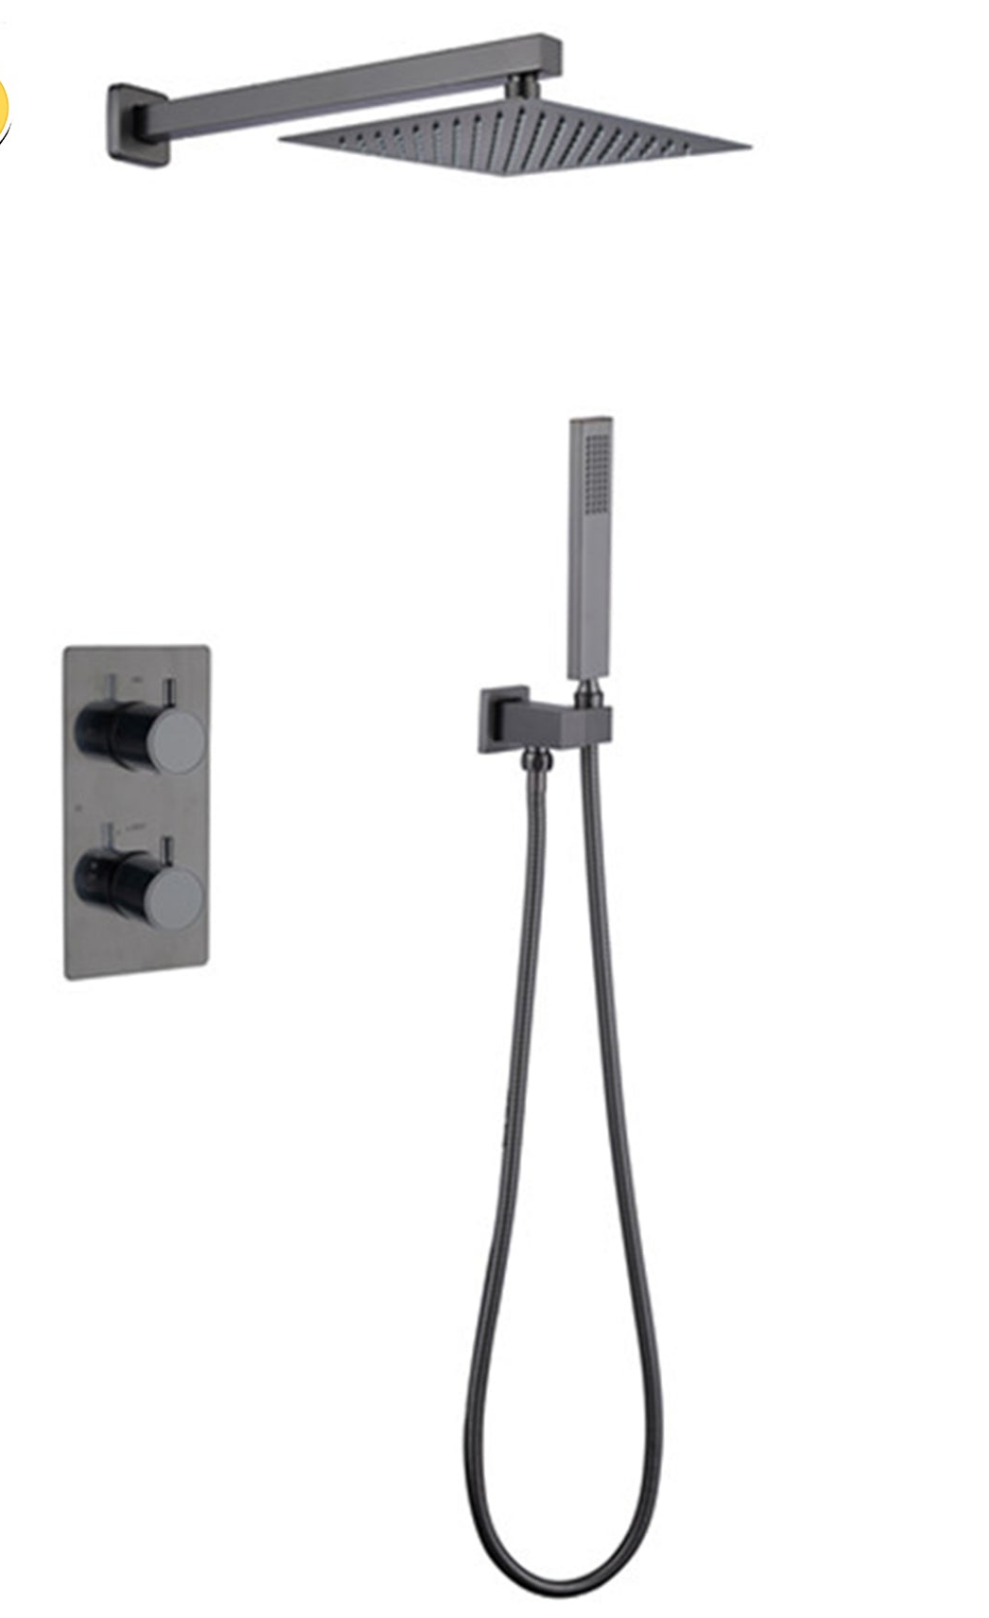 Concealed thermostatic shower mixer, drench head, with or without slide bar.